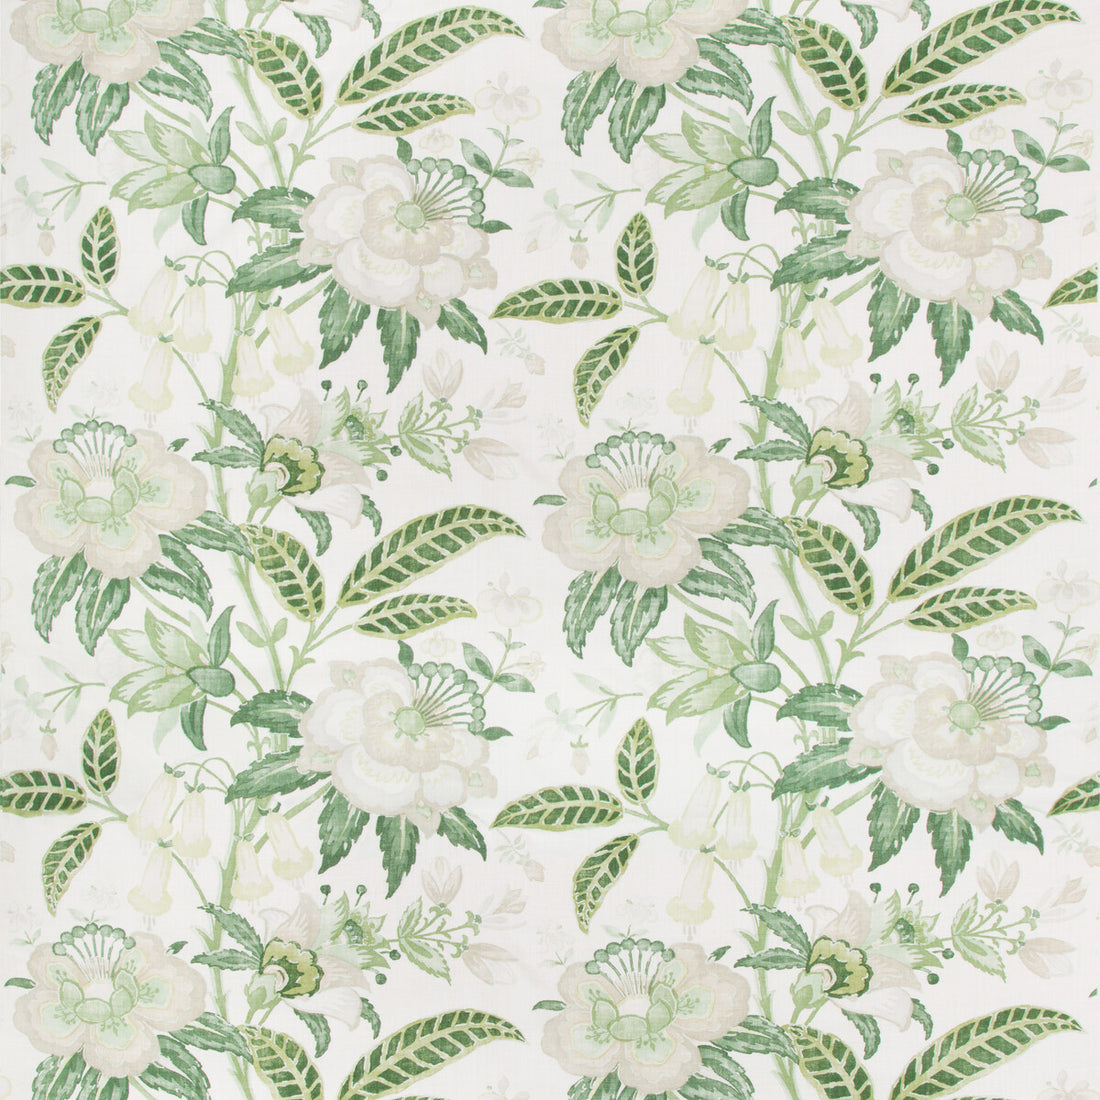 Davenport Print fabric in greenery color - pattern 2017164.233.0 - by Lee Jofa in the Westport collection